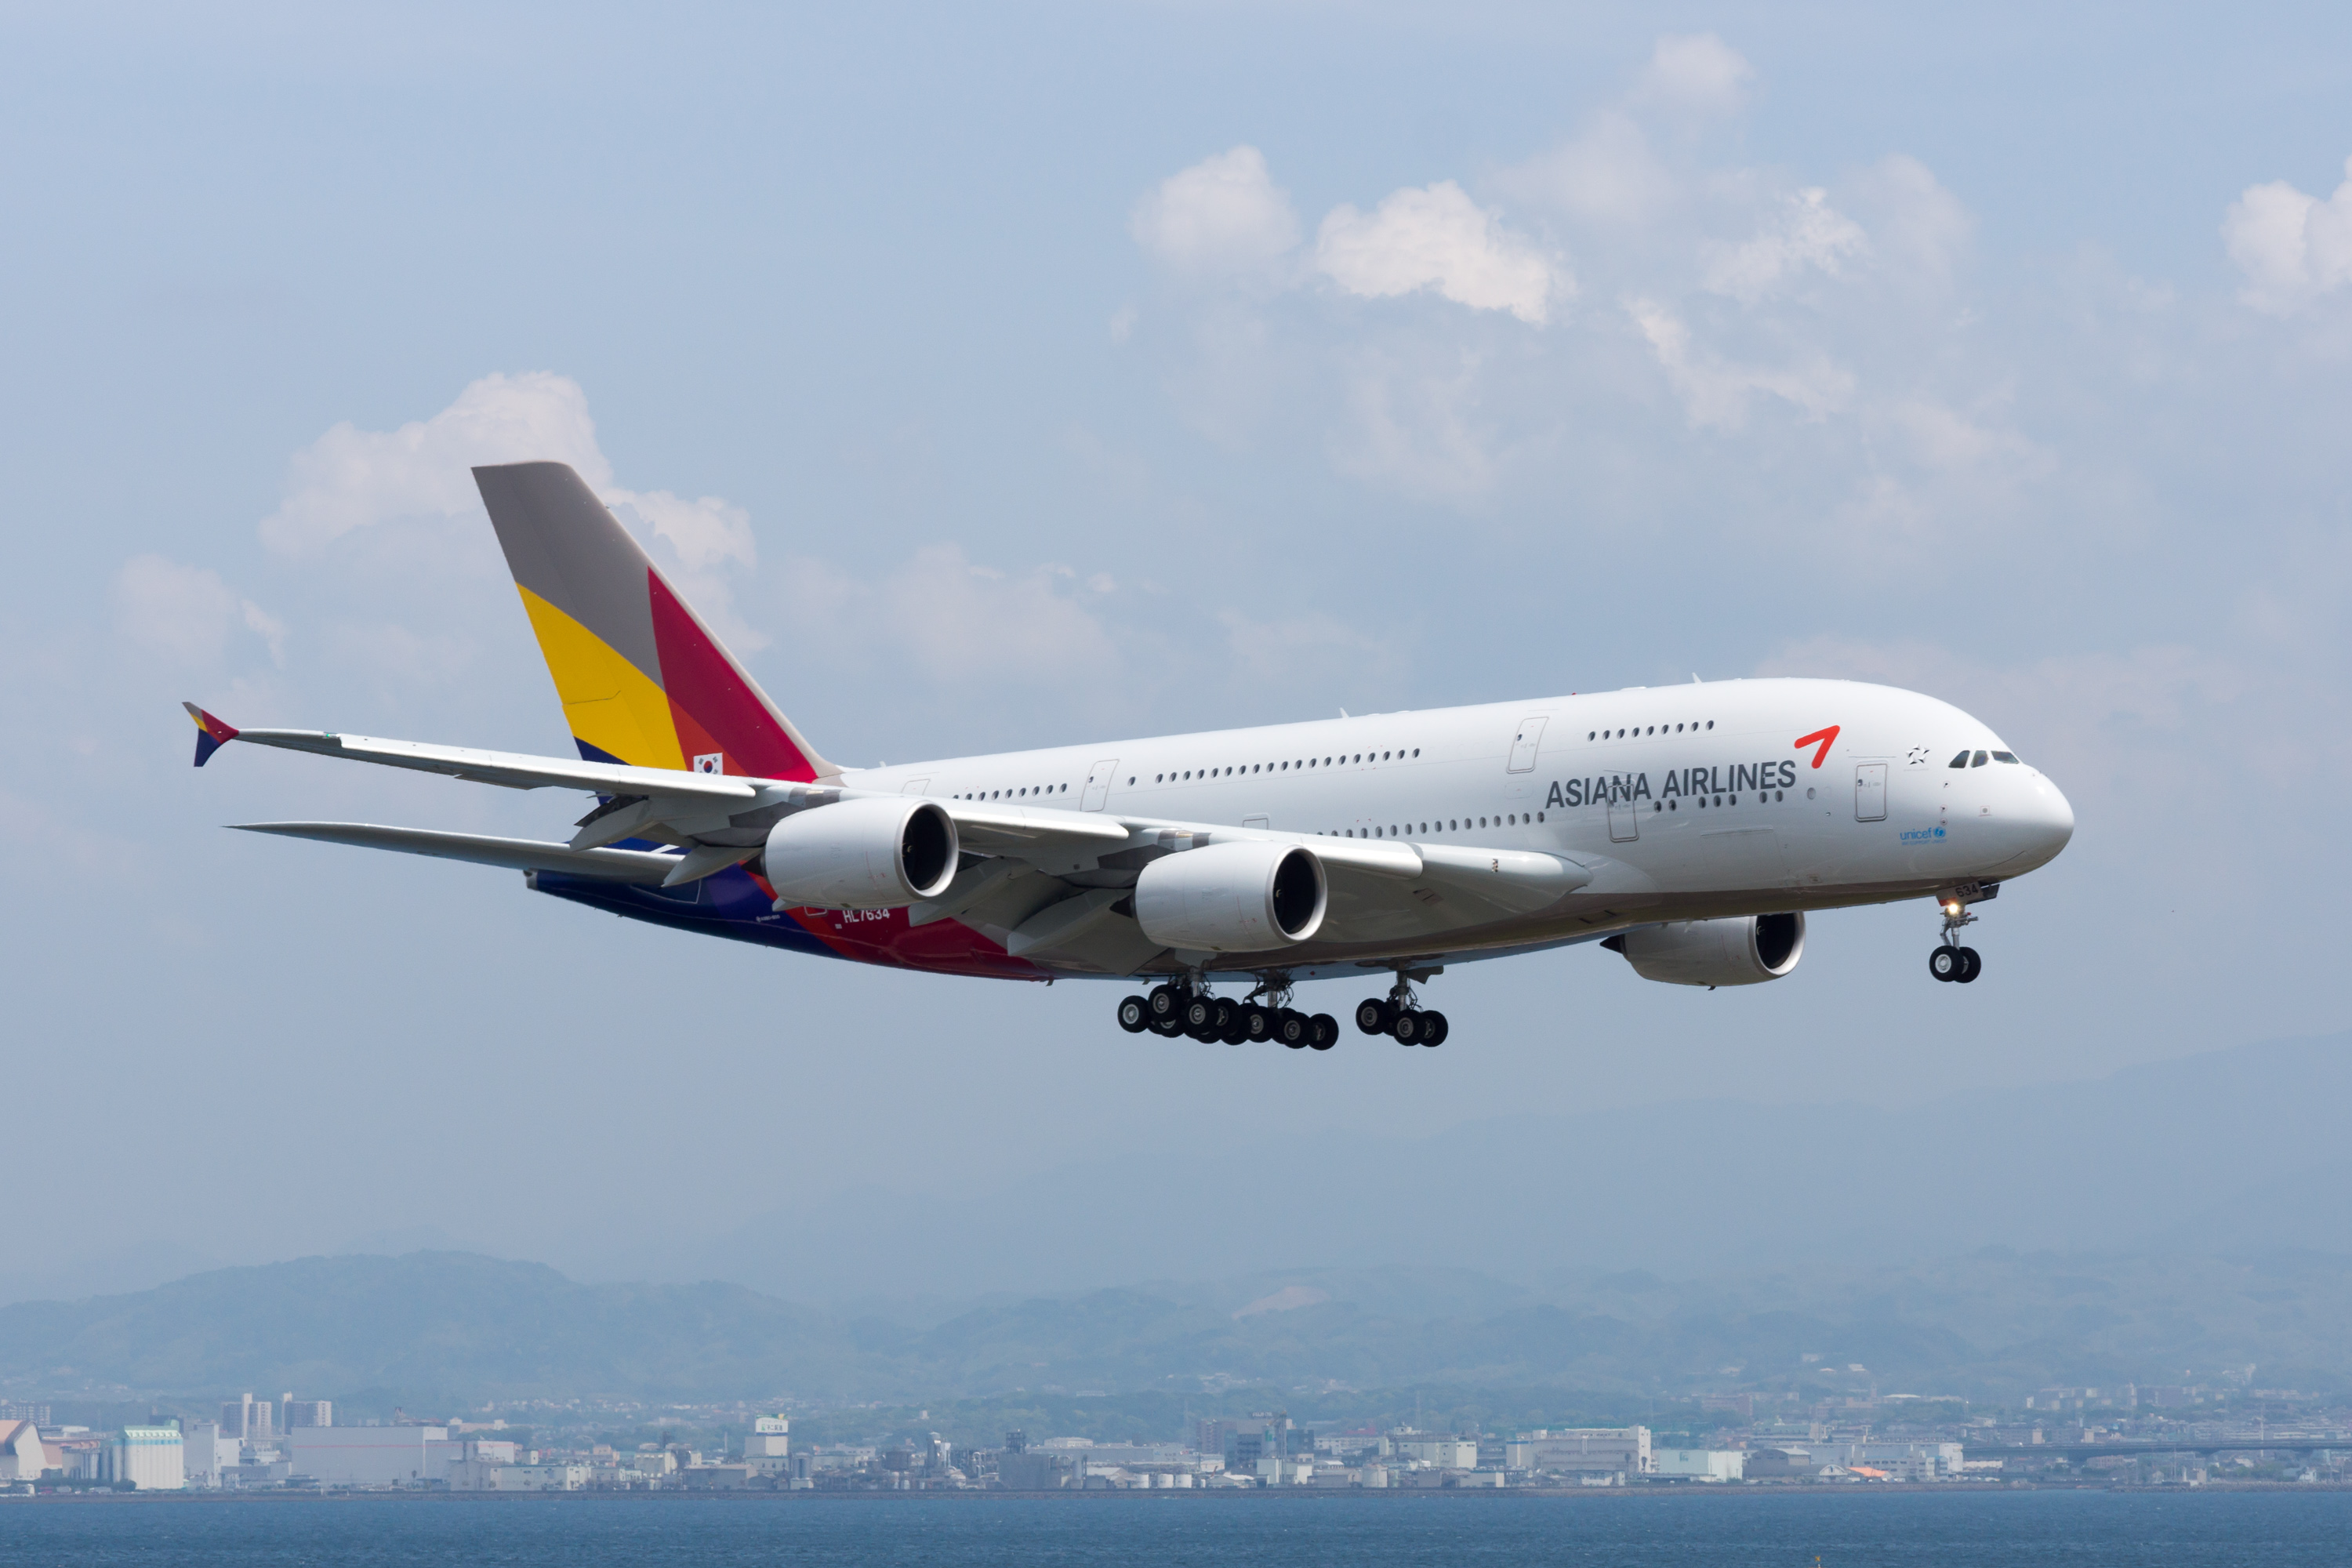 File:Asiana Airlines, A380-800, HL7634 (17578755889).jpg 